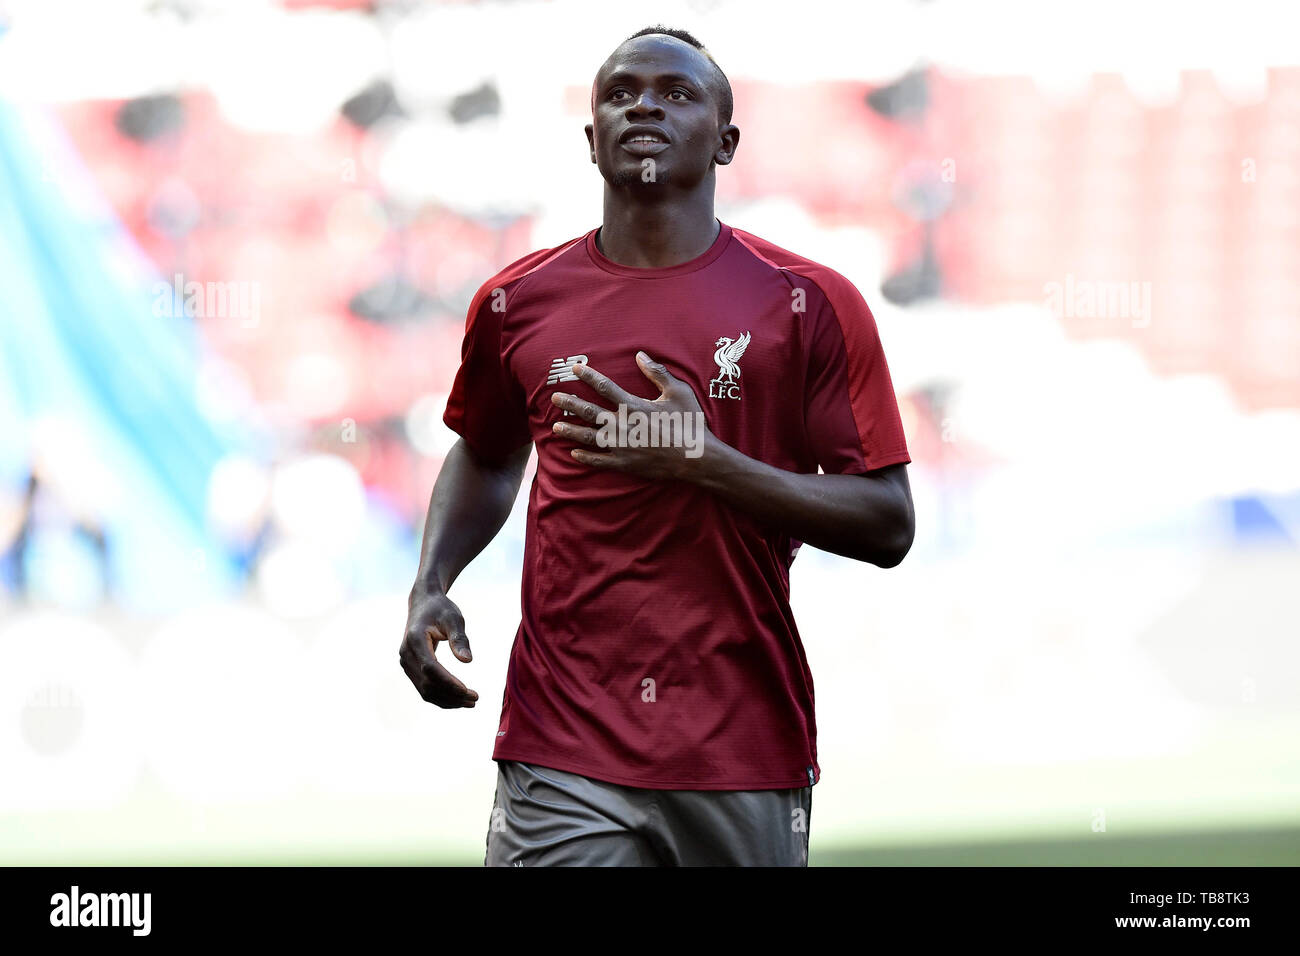 Madrid, Spain. 31st May, 2019. Sadio Mane of Liverpool FC during the Liverpool FC training session on the eve of the UEFA Champions League Final against Tottenham Hotspur at Wanda Metropolitano Stadium, Madrid, Spain on May 31 2019. Photo by Giuseppe Maffia. Credit: UK Sports Pics Ltd/Alamy Live News Stock Photo